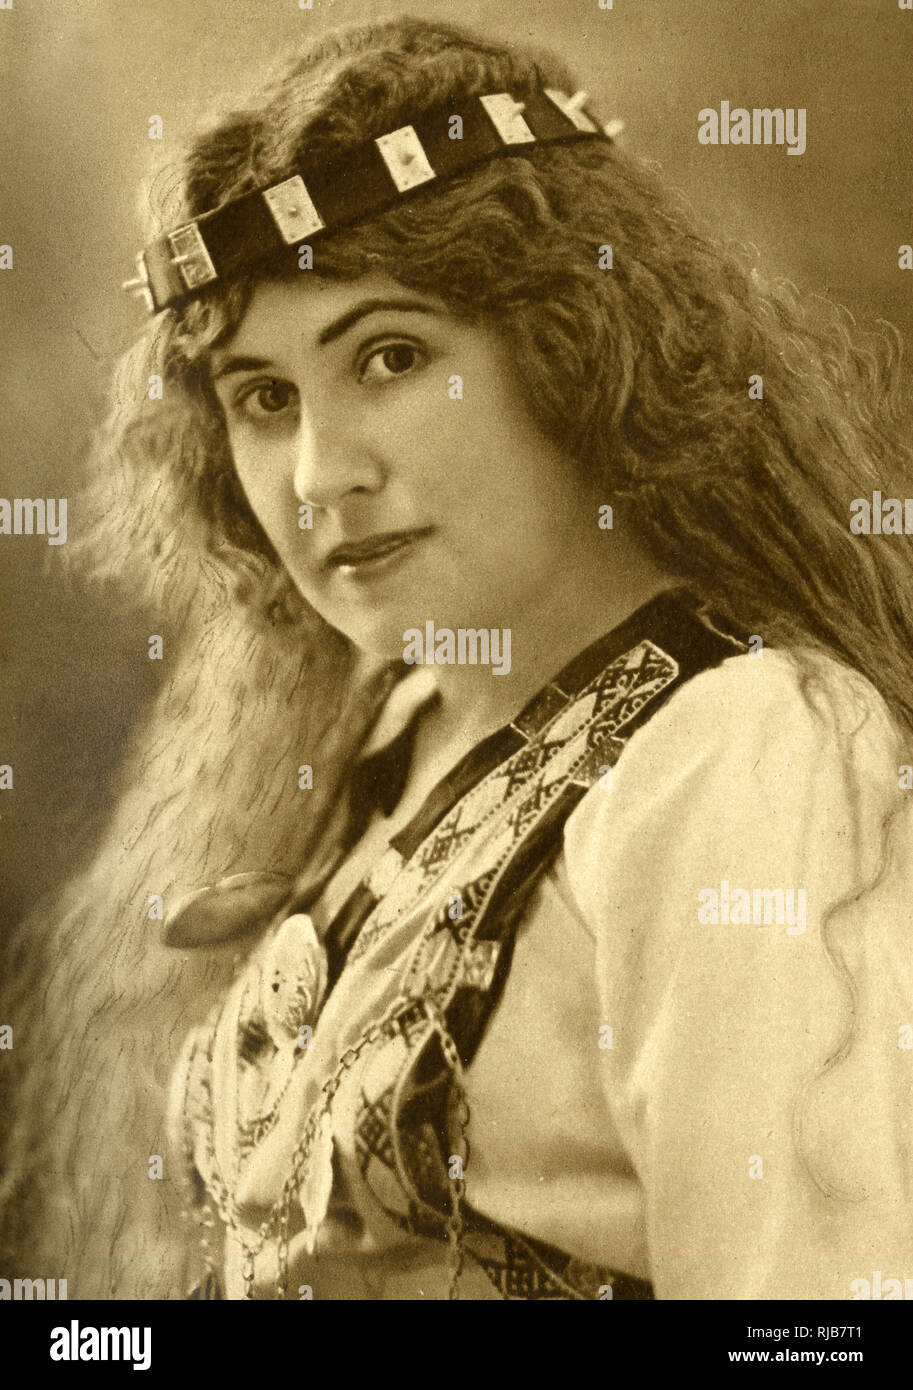 Aino Ackte (1876-1944), Finnish operatic soprano, seen here wearing national costume. She founded an annual festival at Nyslott (Savonlinna) to foster Finnish music, first held in 1912. Stock Photo